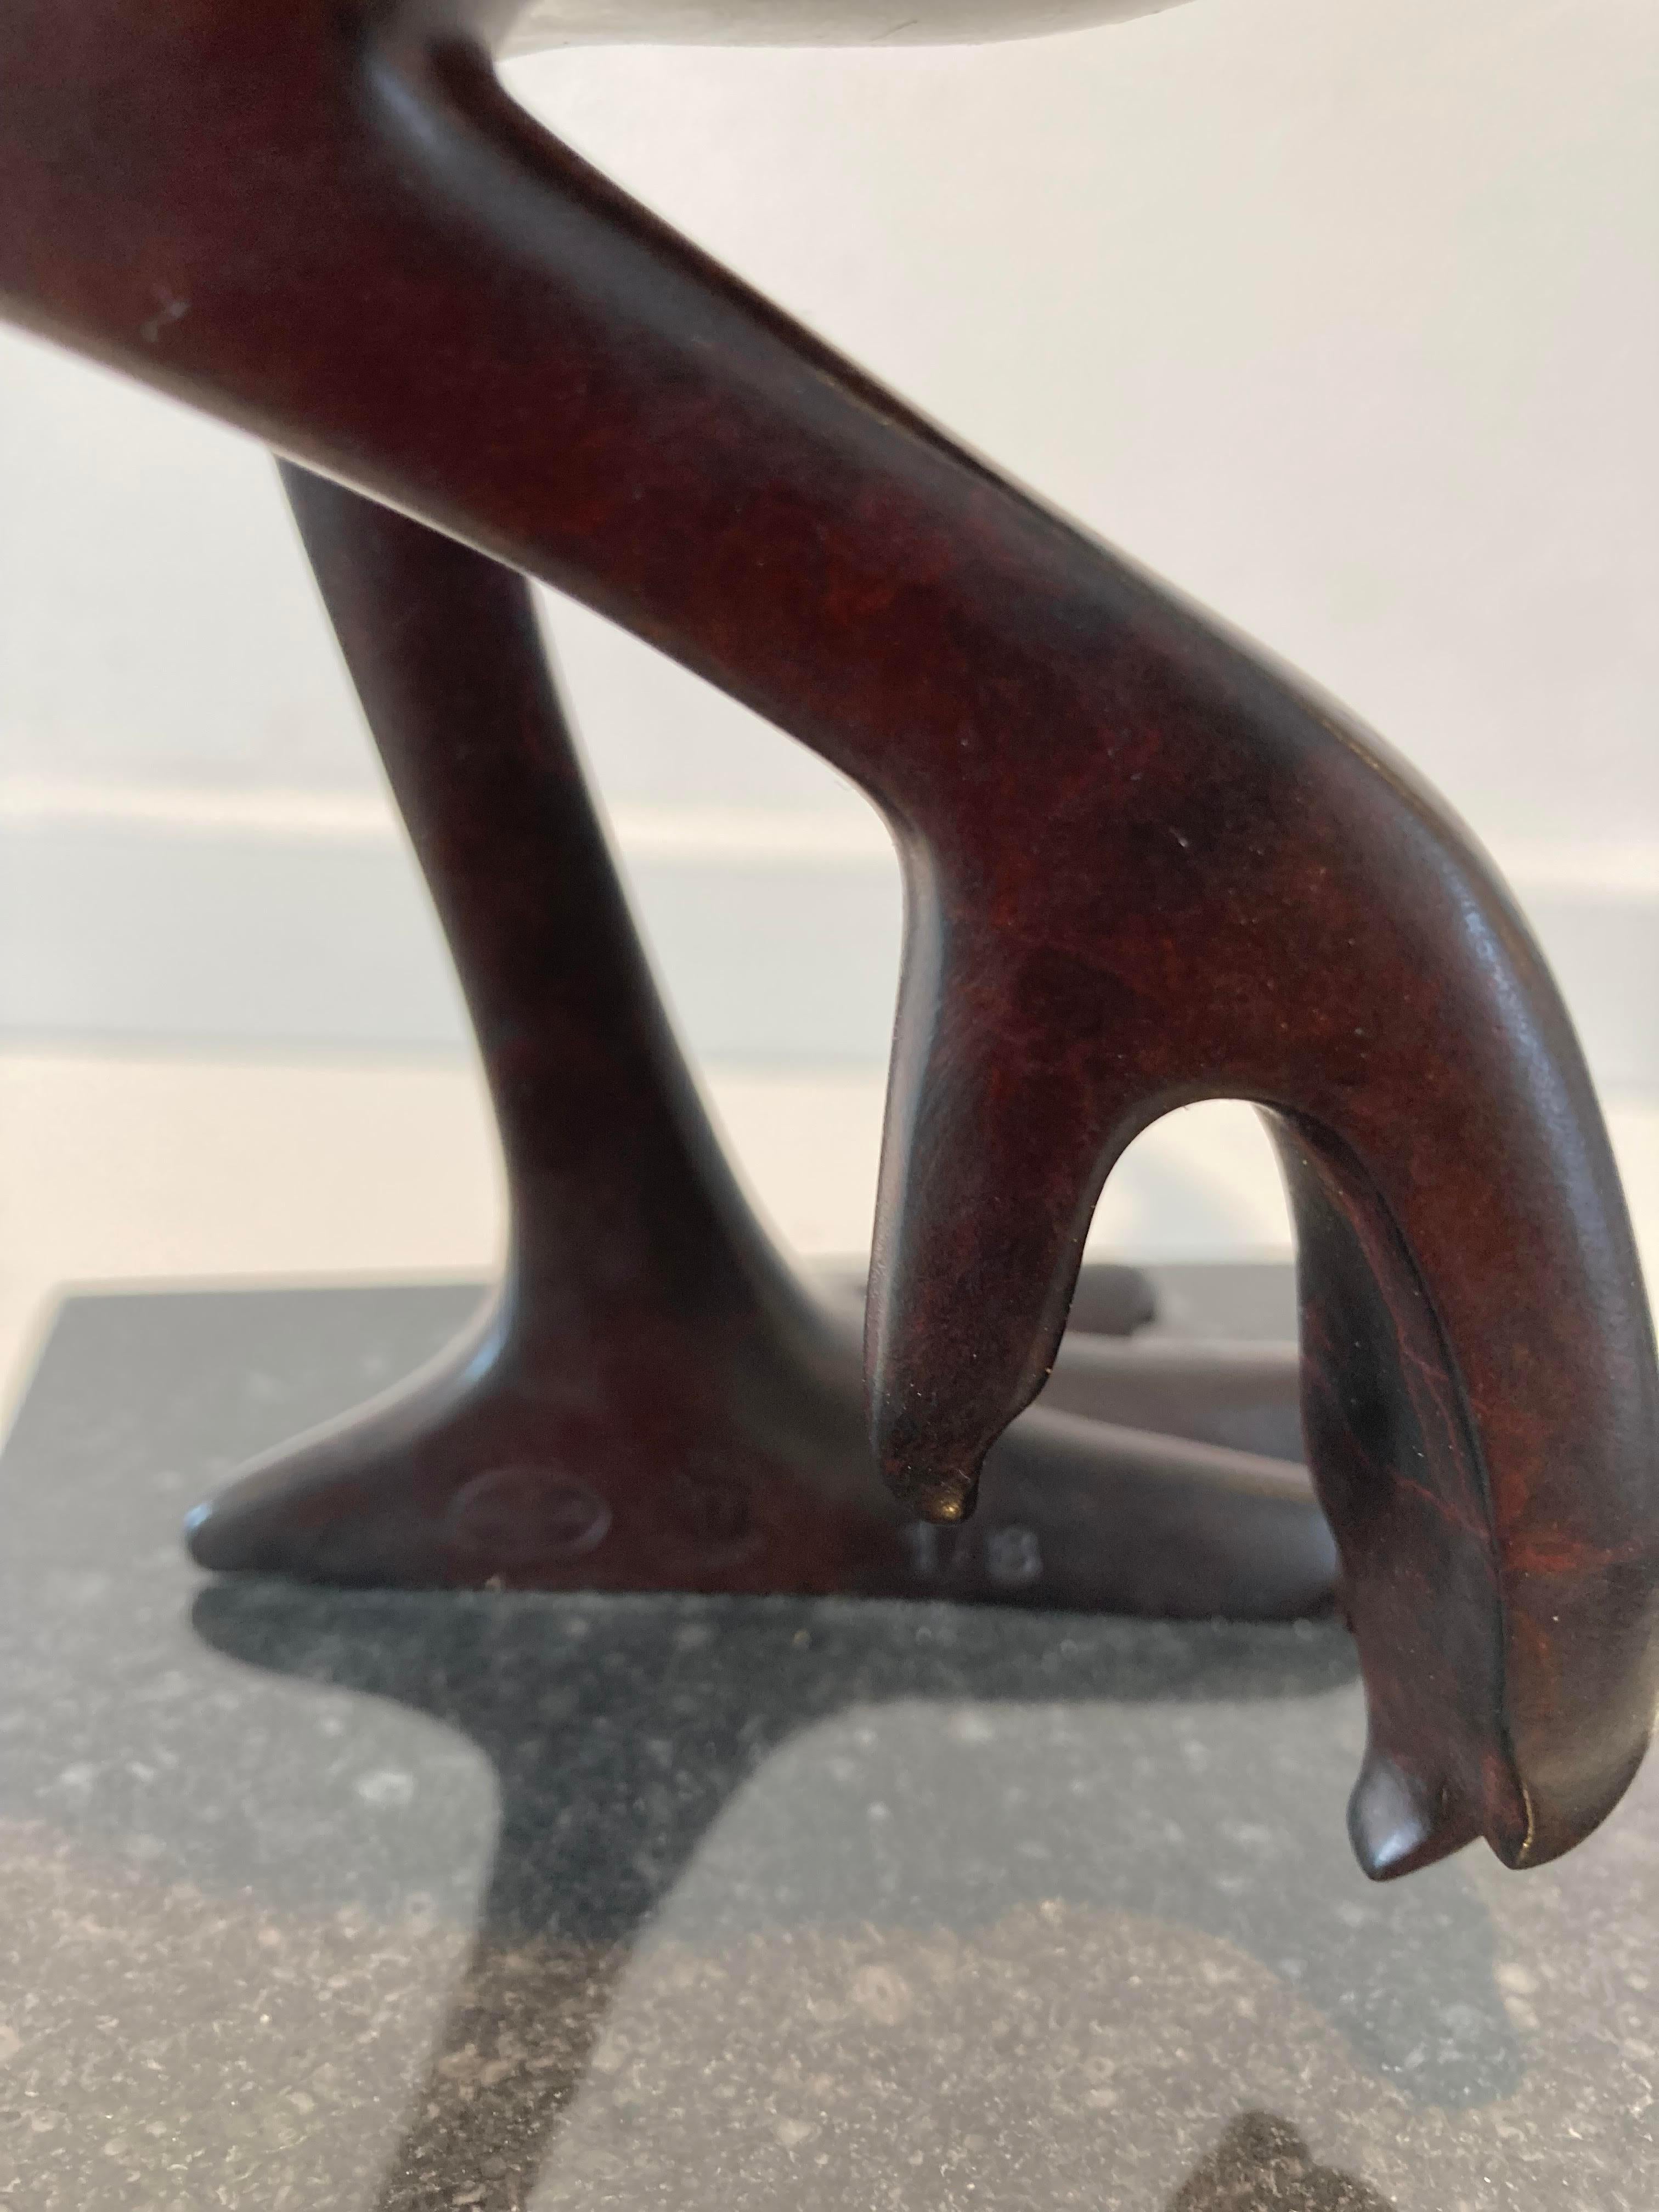 
Fazant no. 9 (Pheasant) Bird Animal Bronze Sculpture Dark Brown Patina In Stock

Evert den Hartog (born in Groot-Ammers, The Netherlands in 1949) followed his education to be a sculptor at the Rotterdam Academy of Visual Arts. In the years